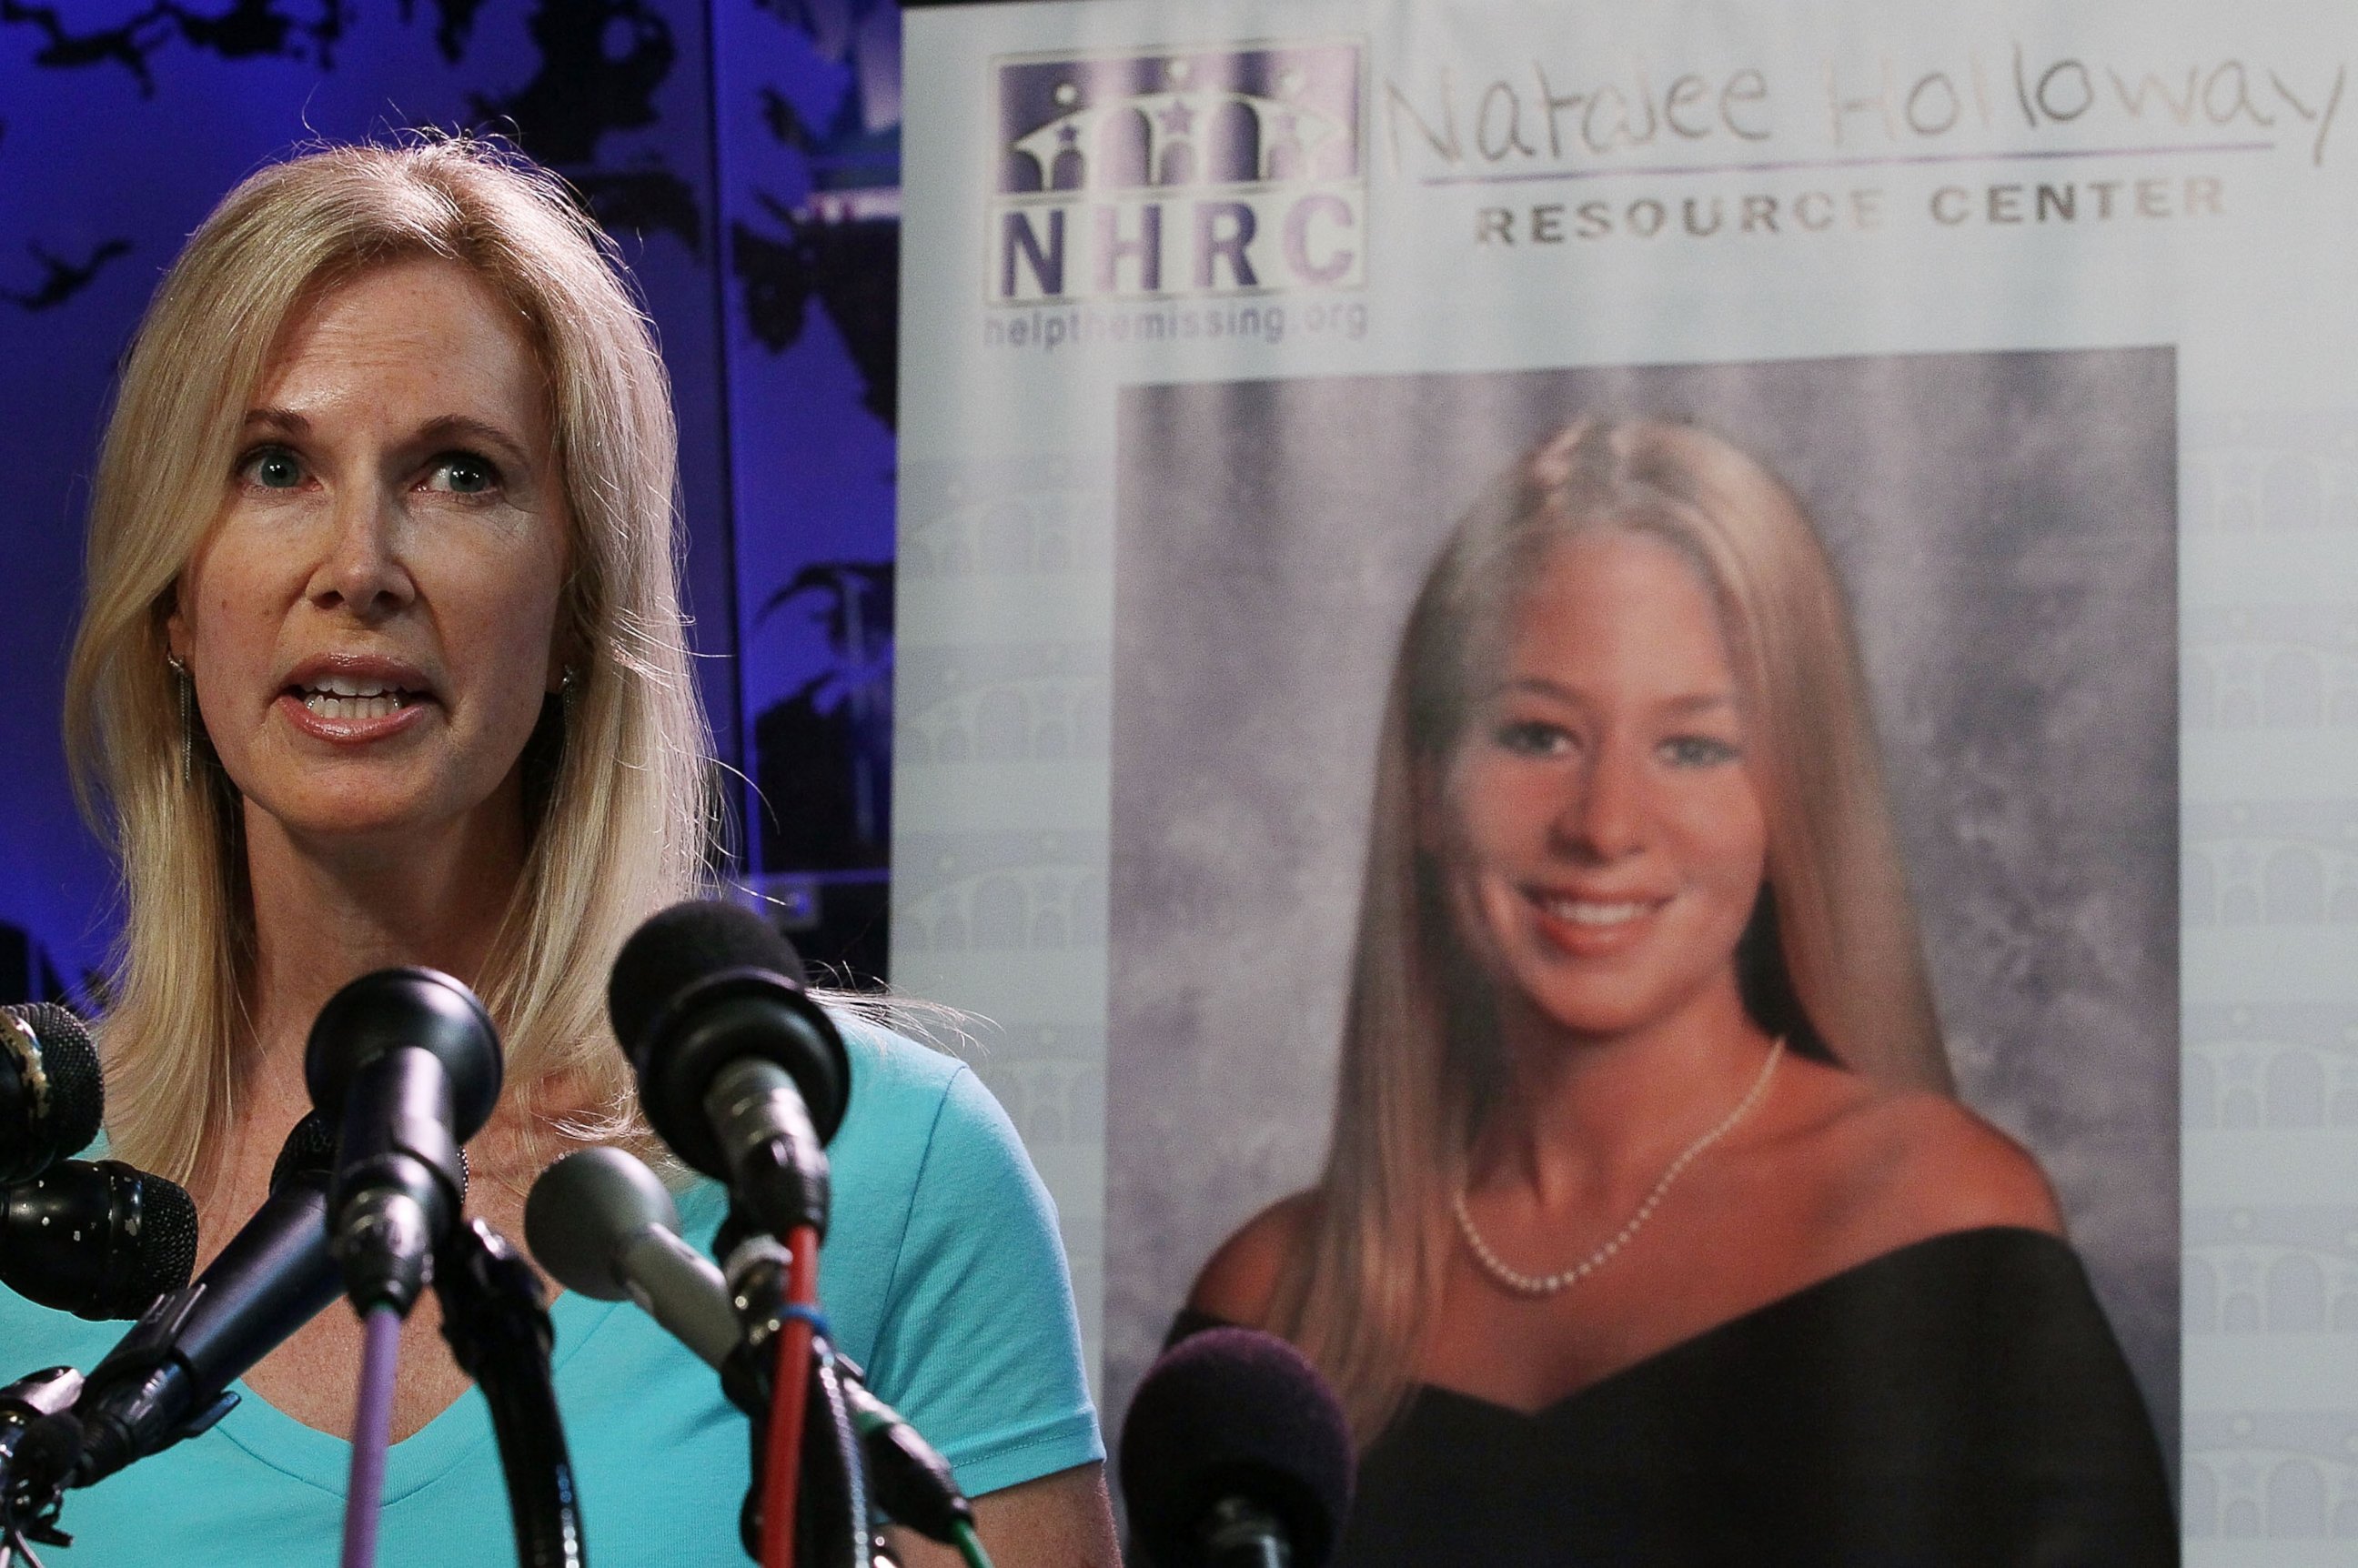 PHOTO: Beth Holloway participates in the launch of the Natalee Holloway Resource Center on June 8, 2010 in Washington.